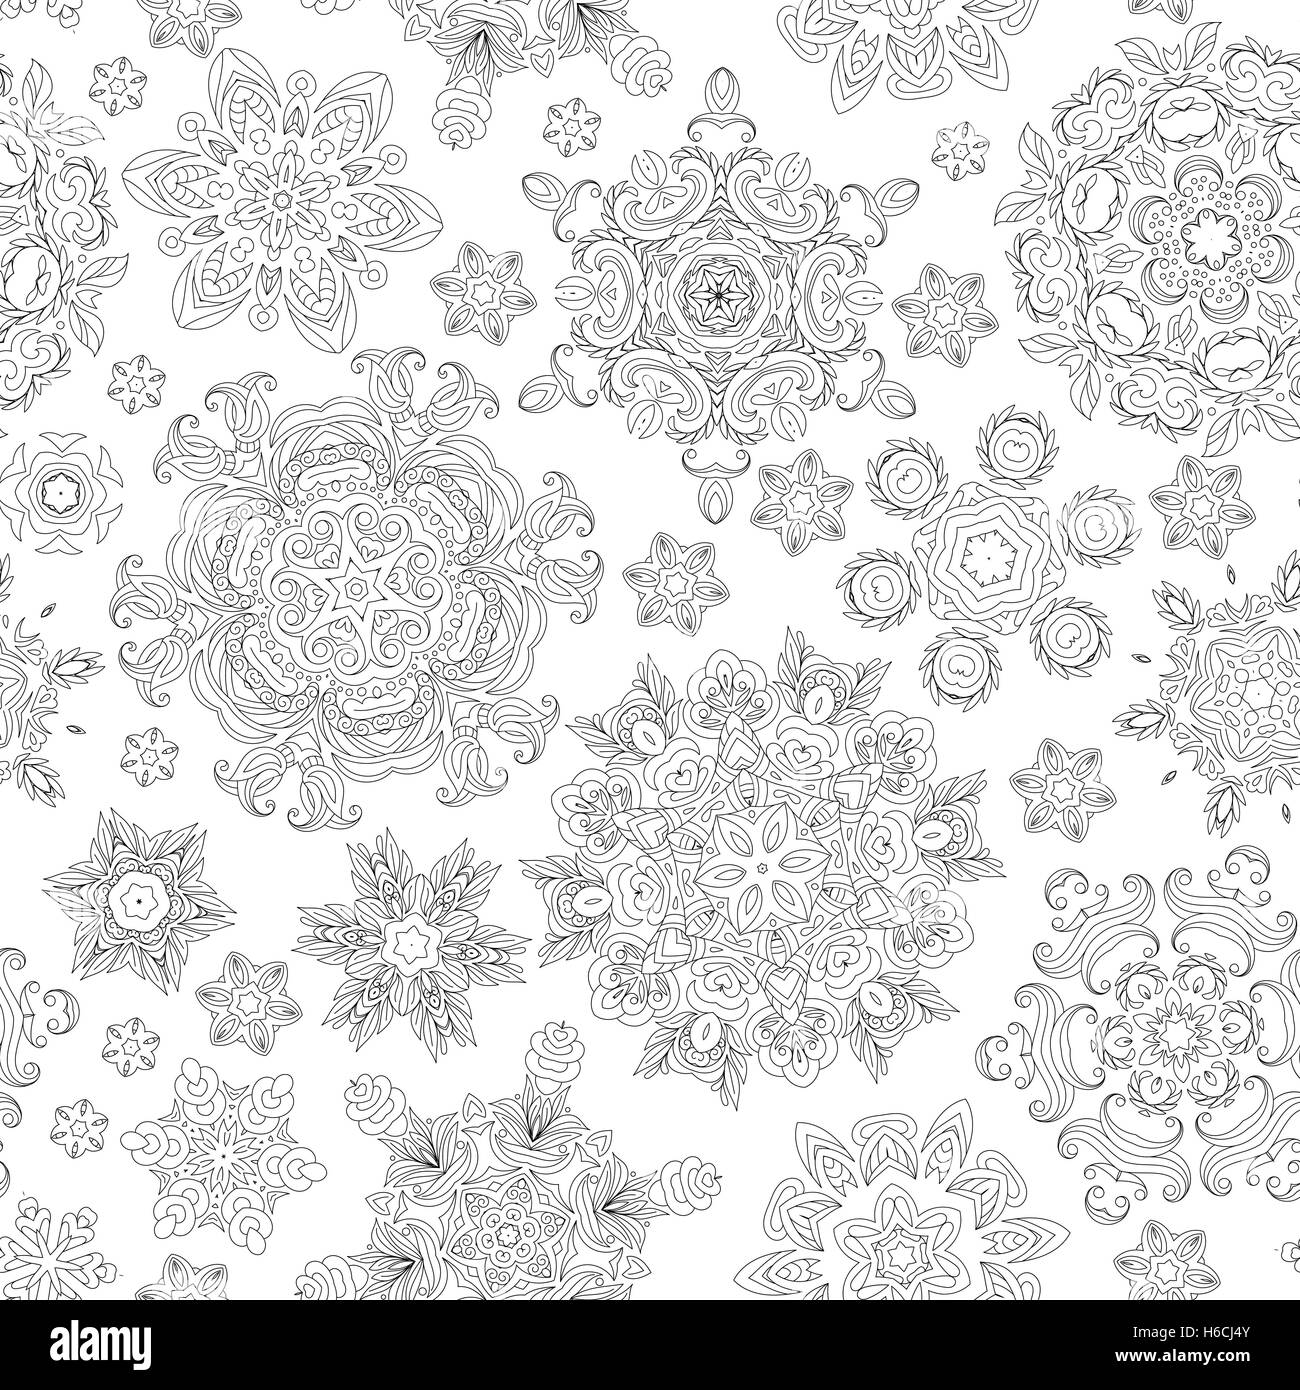 Christmas pattern from snowflakes for a card vector.   coloring book.  hand-drawn doodle decorative elements Stock Vector